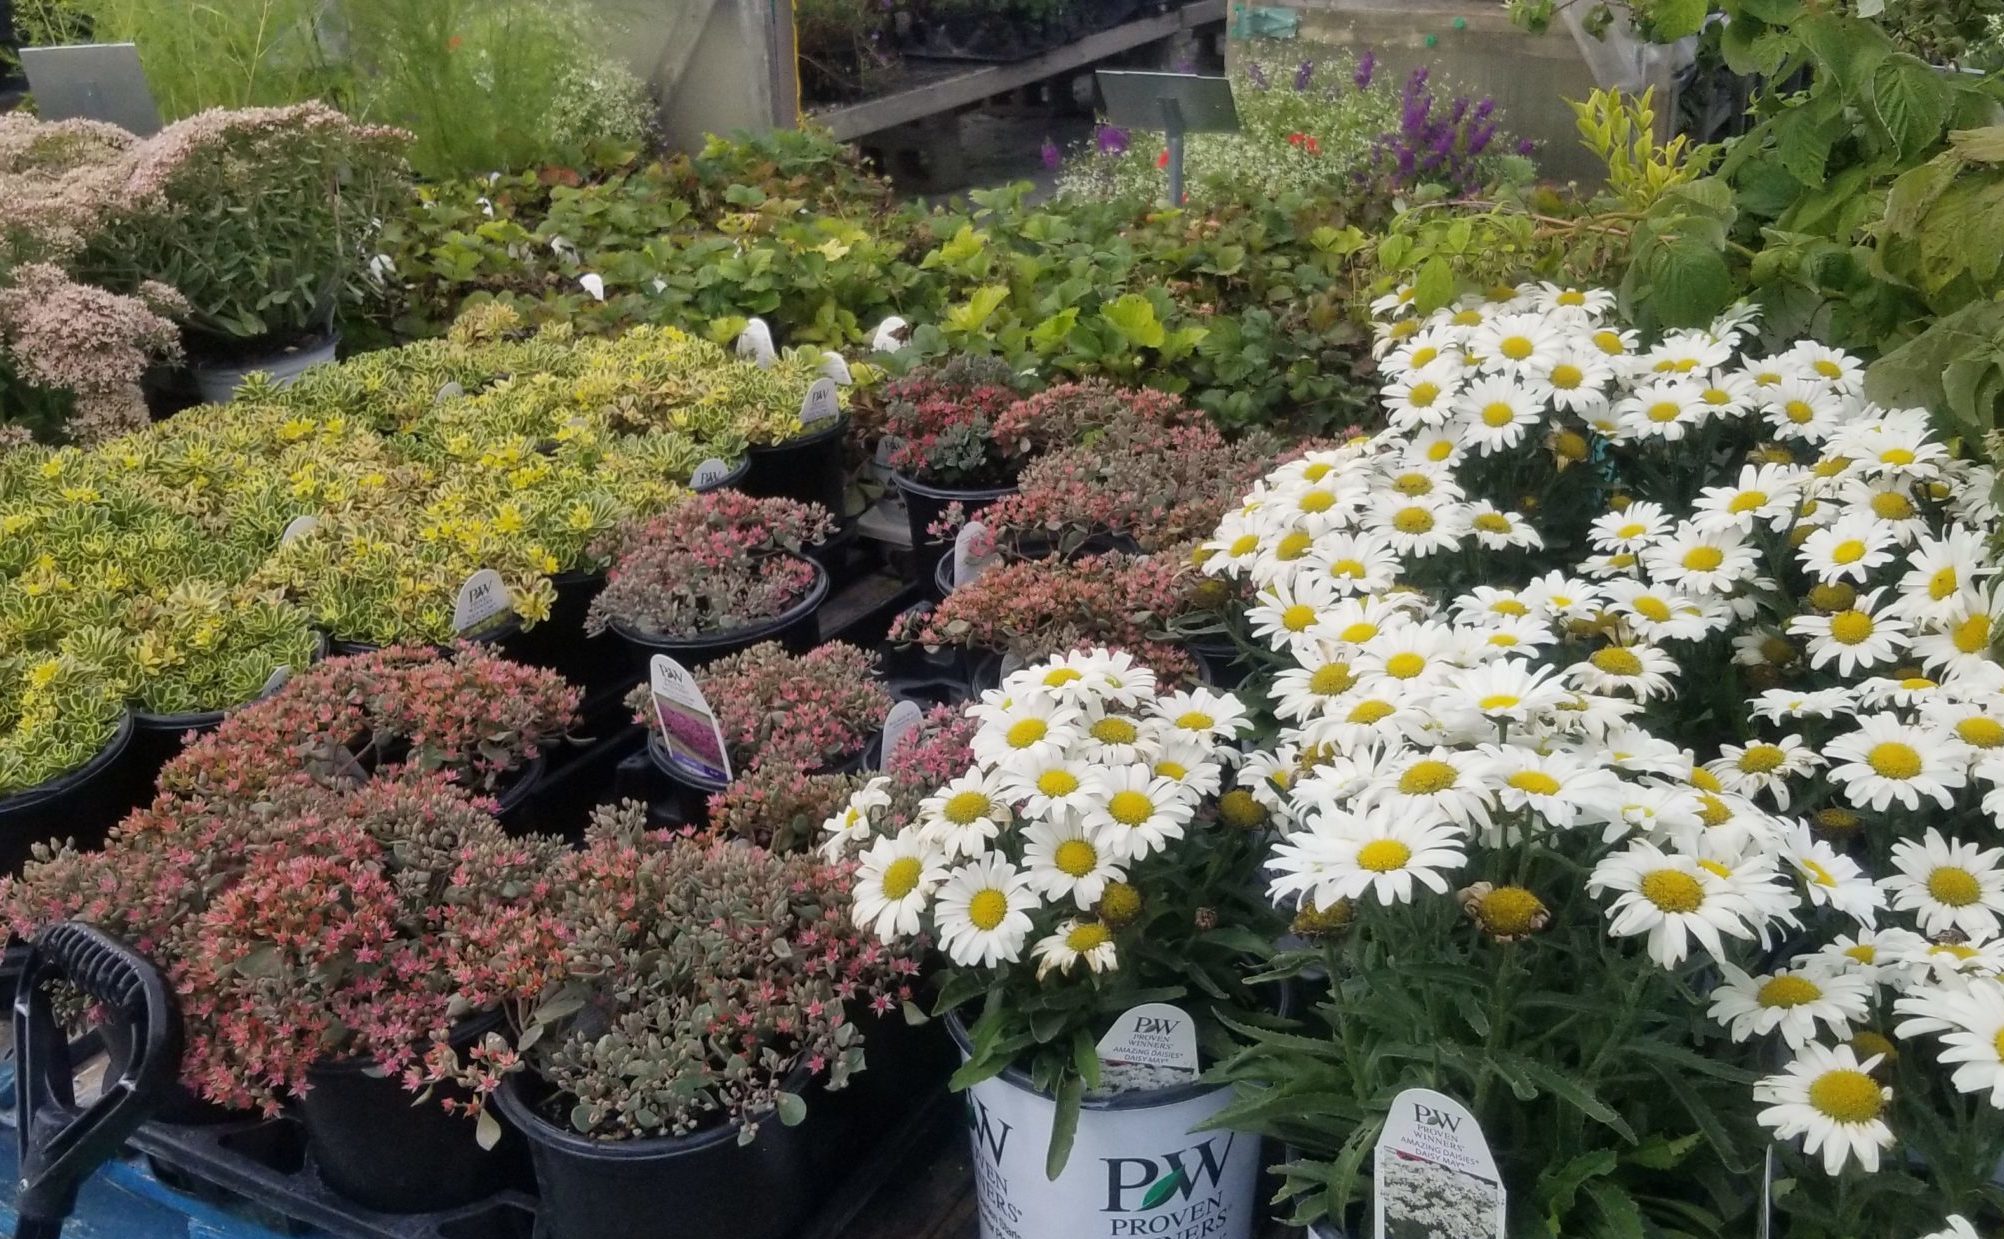 Variety of Potted flowers and plants including daisies